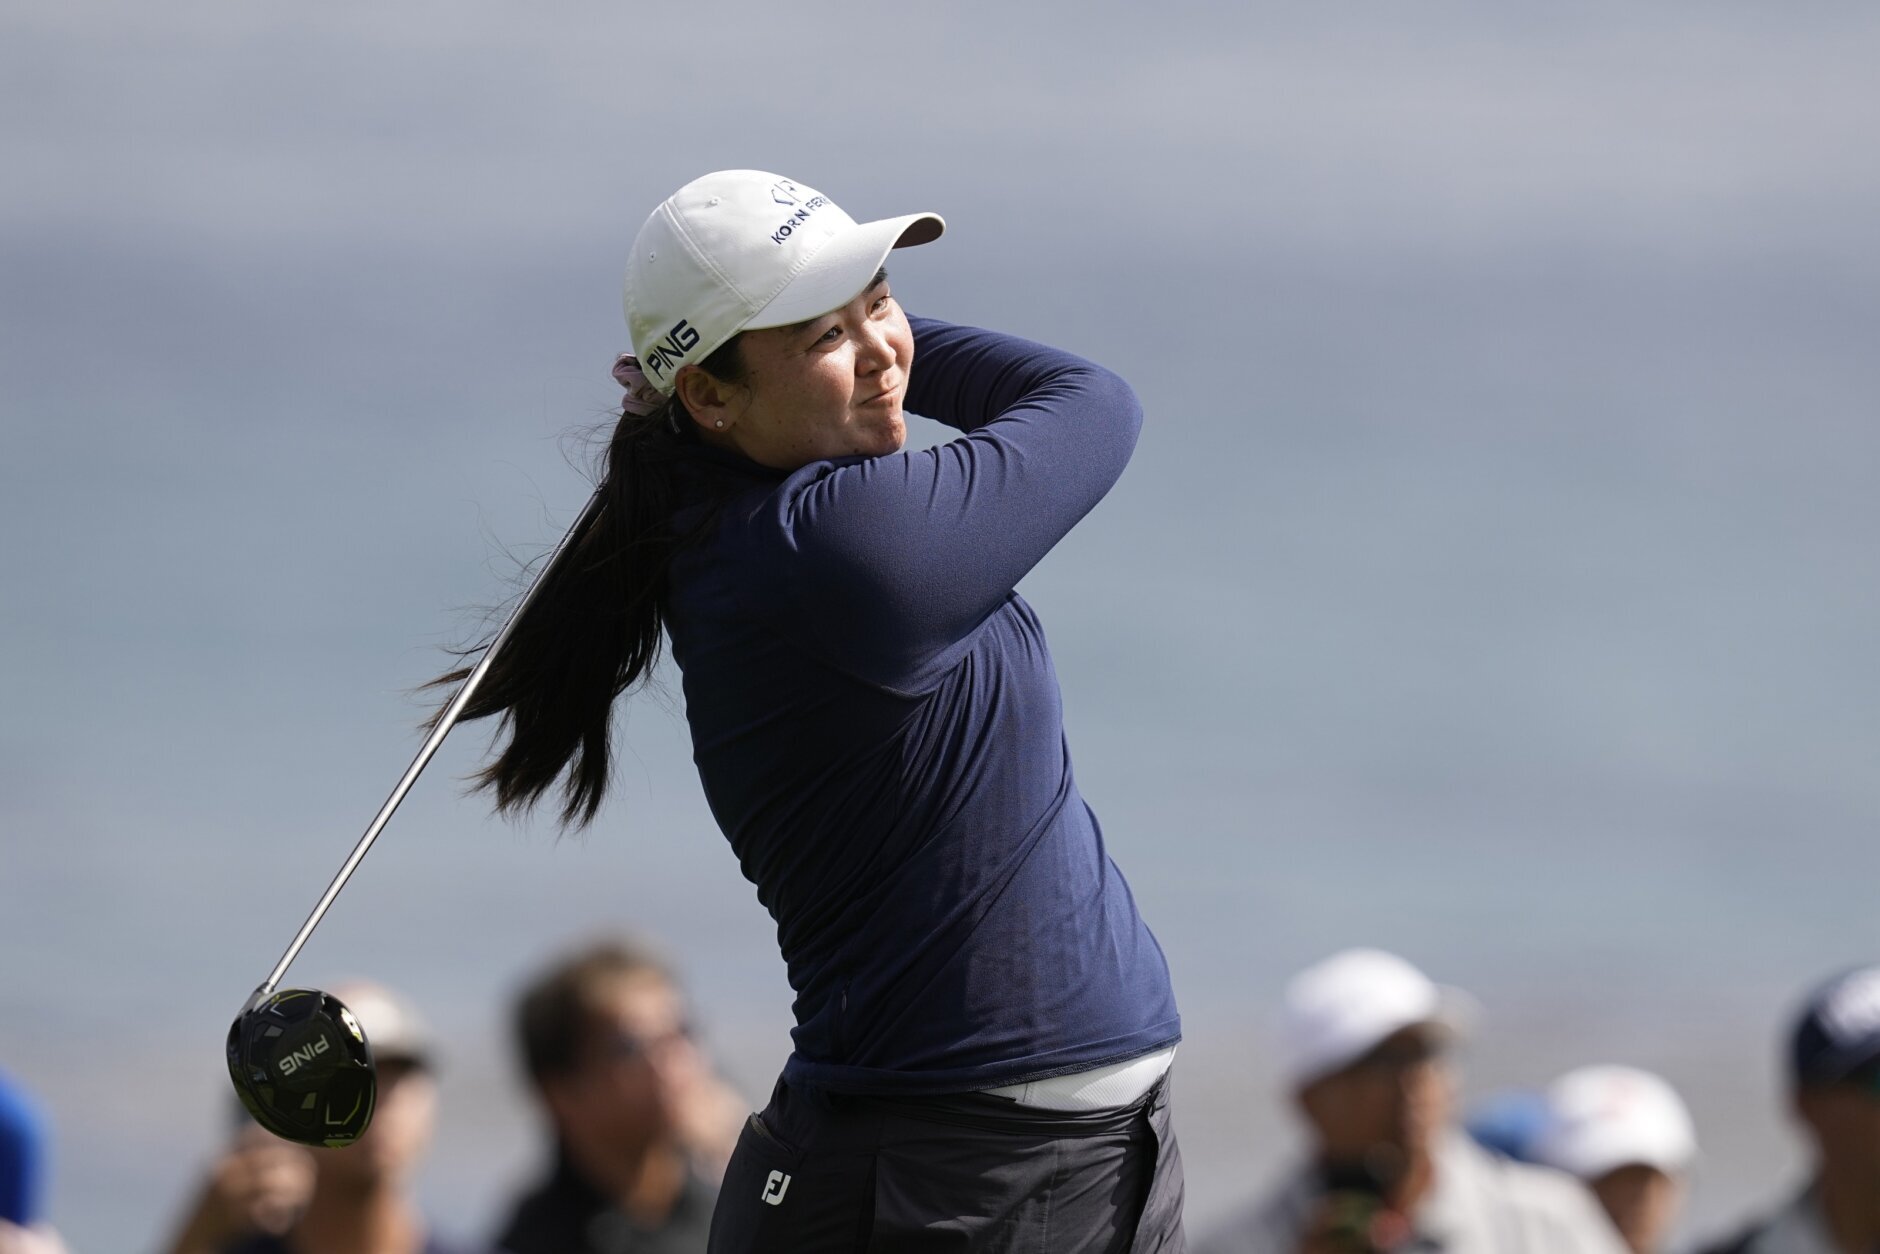 Allisen Corpuz wins the US Womens Open at Pebble Beach for her first LPGA title